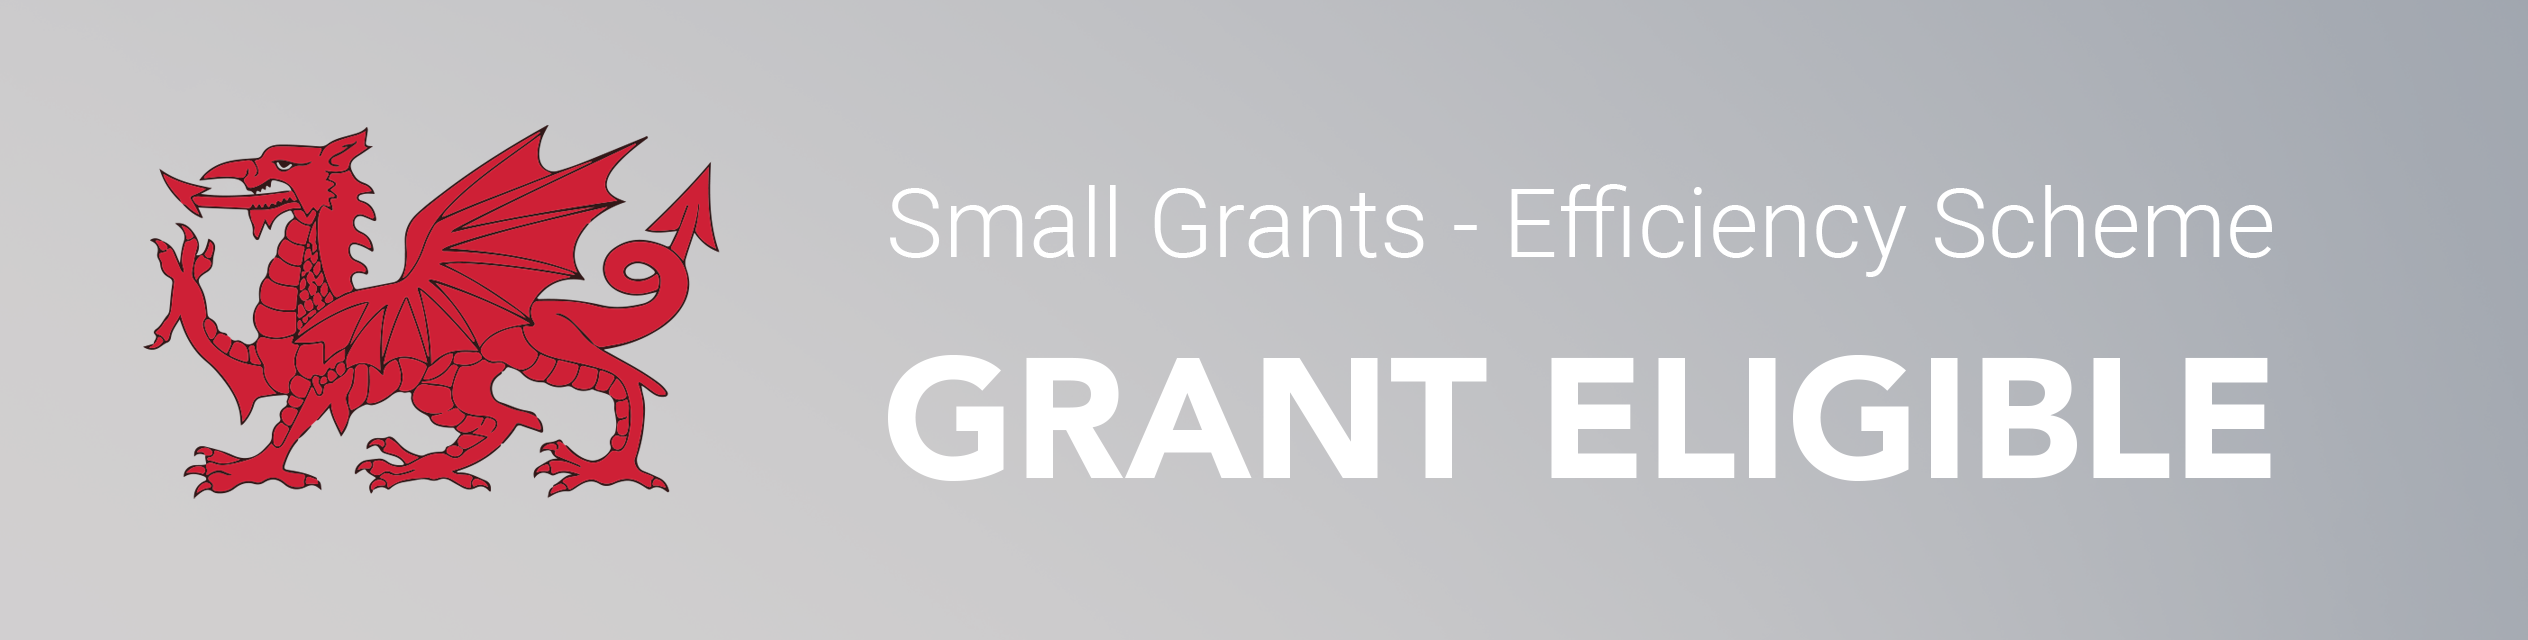 Welsh Small Grants Efficiency Scheme - Grant Eligibility Icon